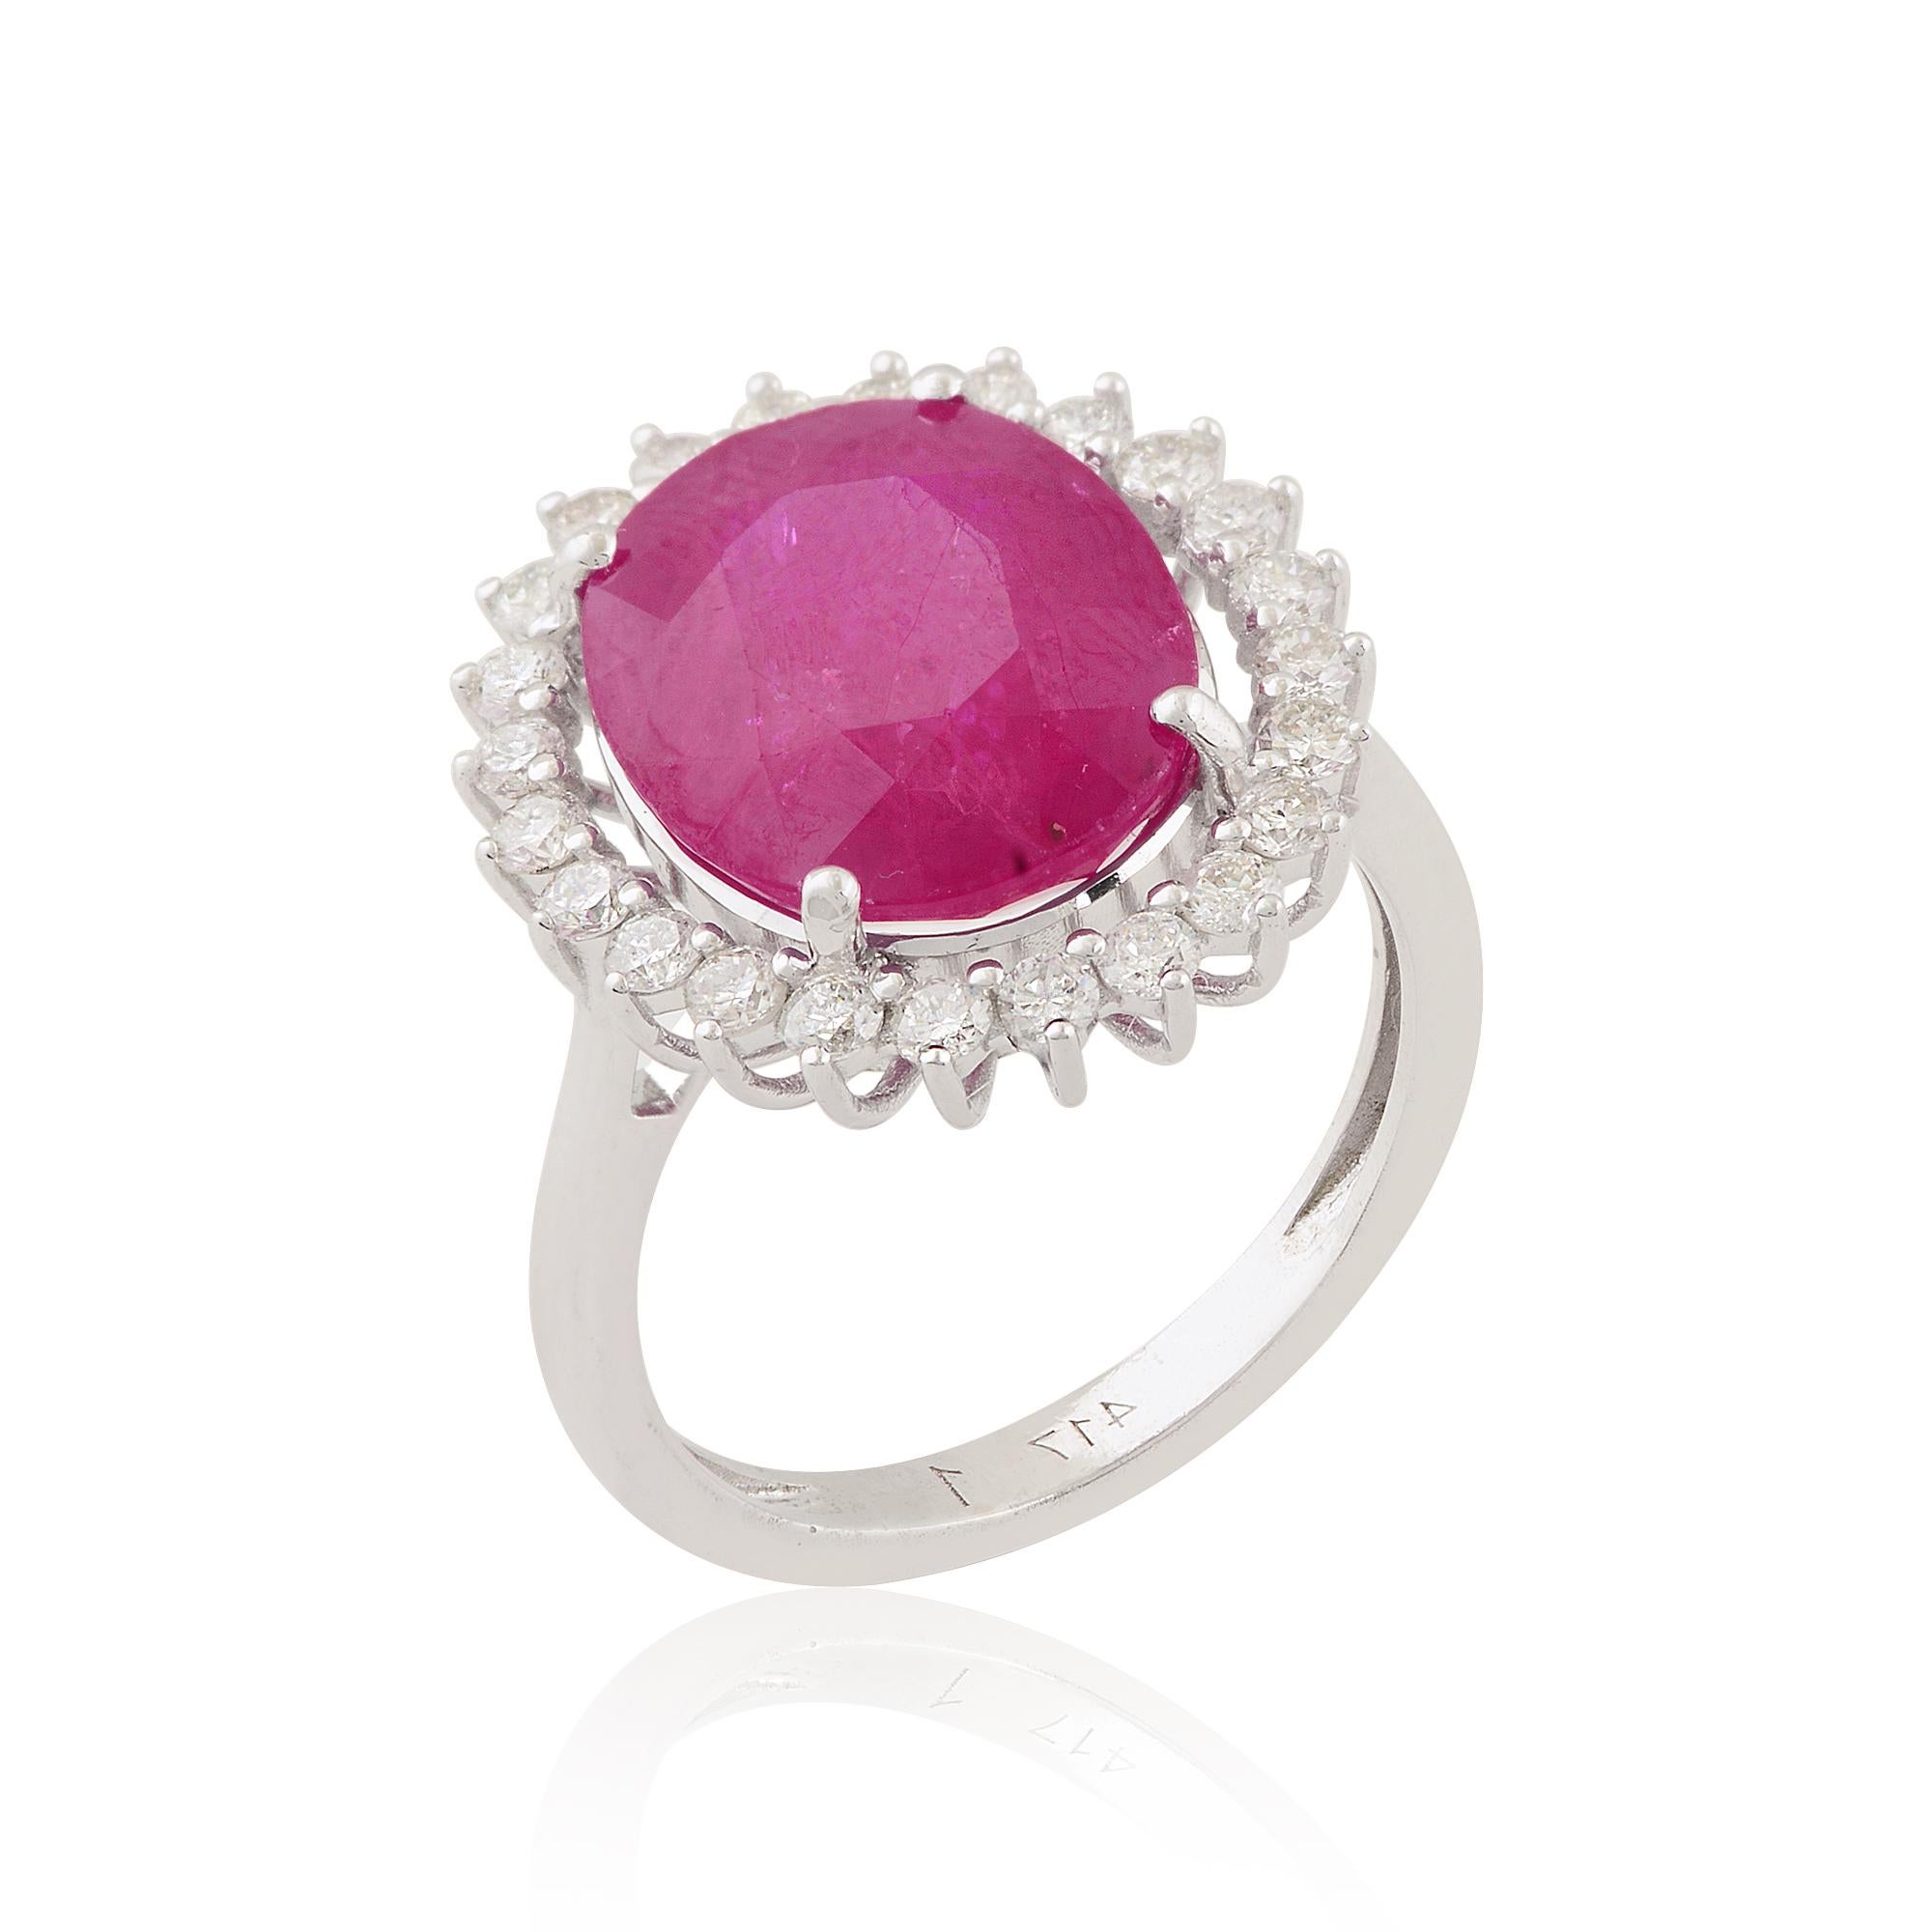 At the heart of this stunning cocktail ring gleams a magnificent oval ruby gemstone, renowned for its rich red hue and exceptional clarity. The ruby, with its vibrant color and inherent allure, commands attention and exudes a sense of prestige and